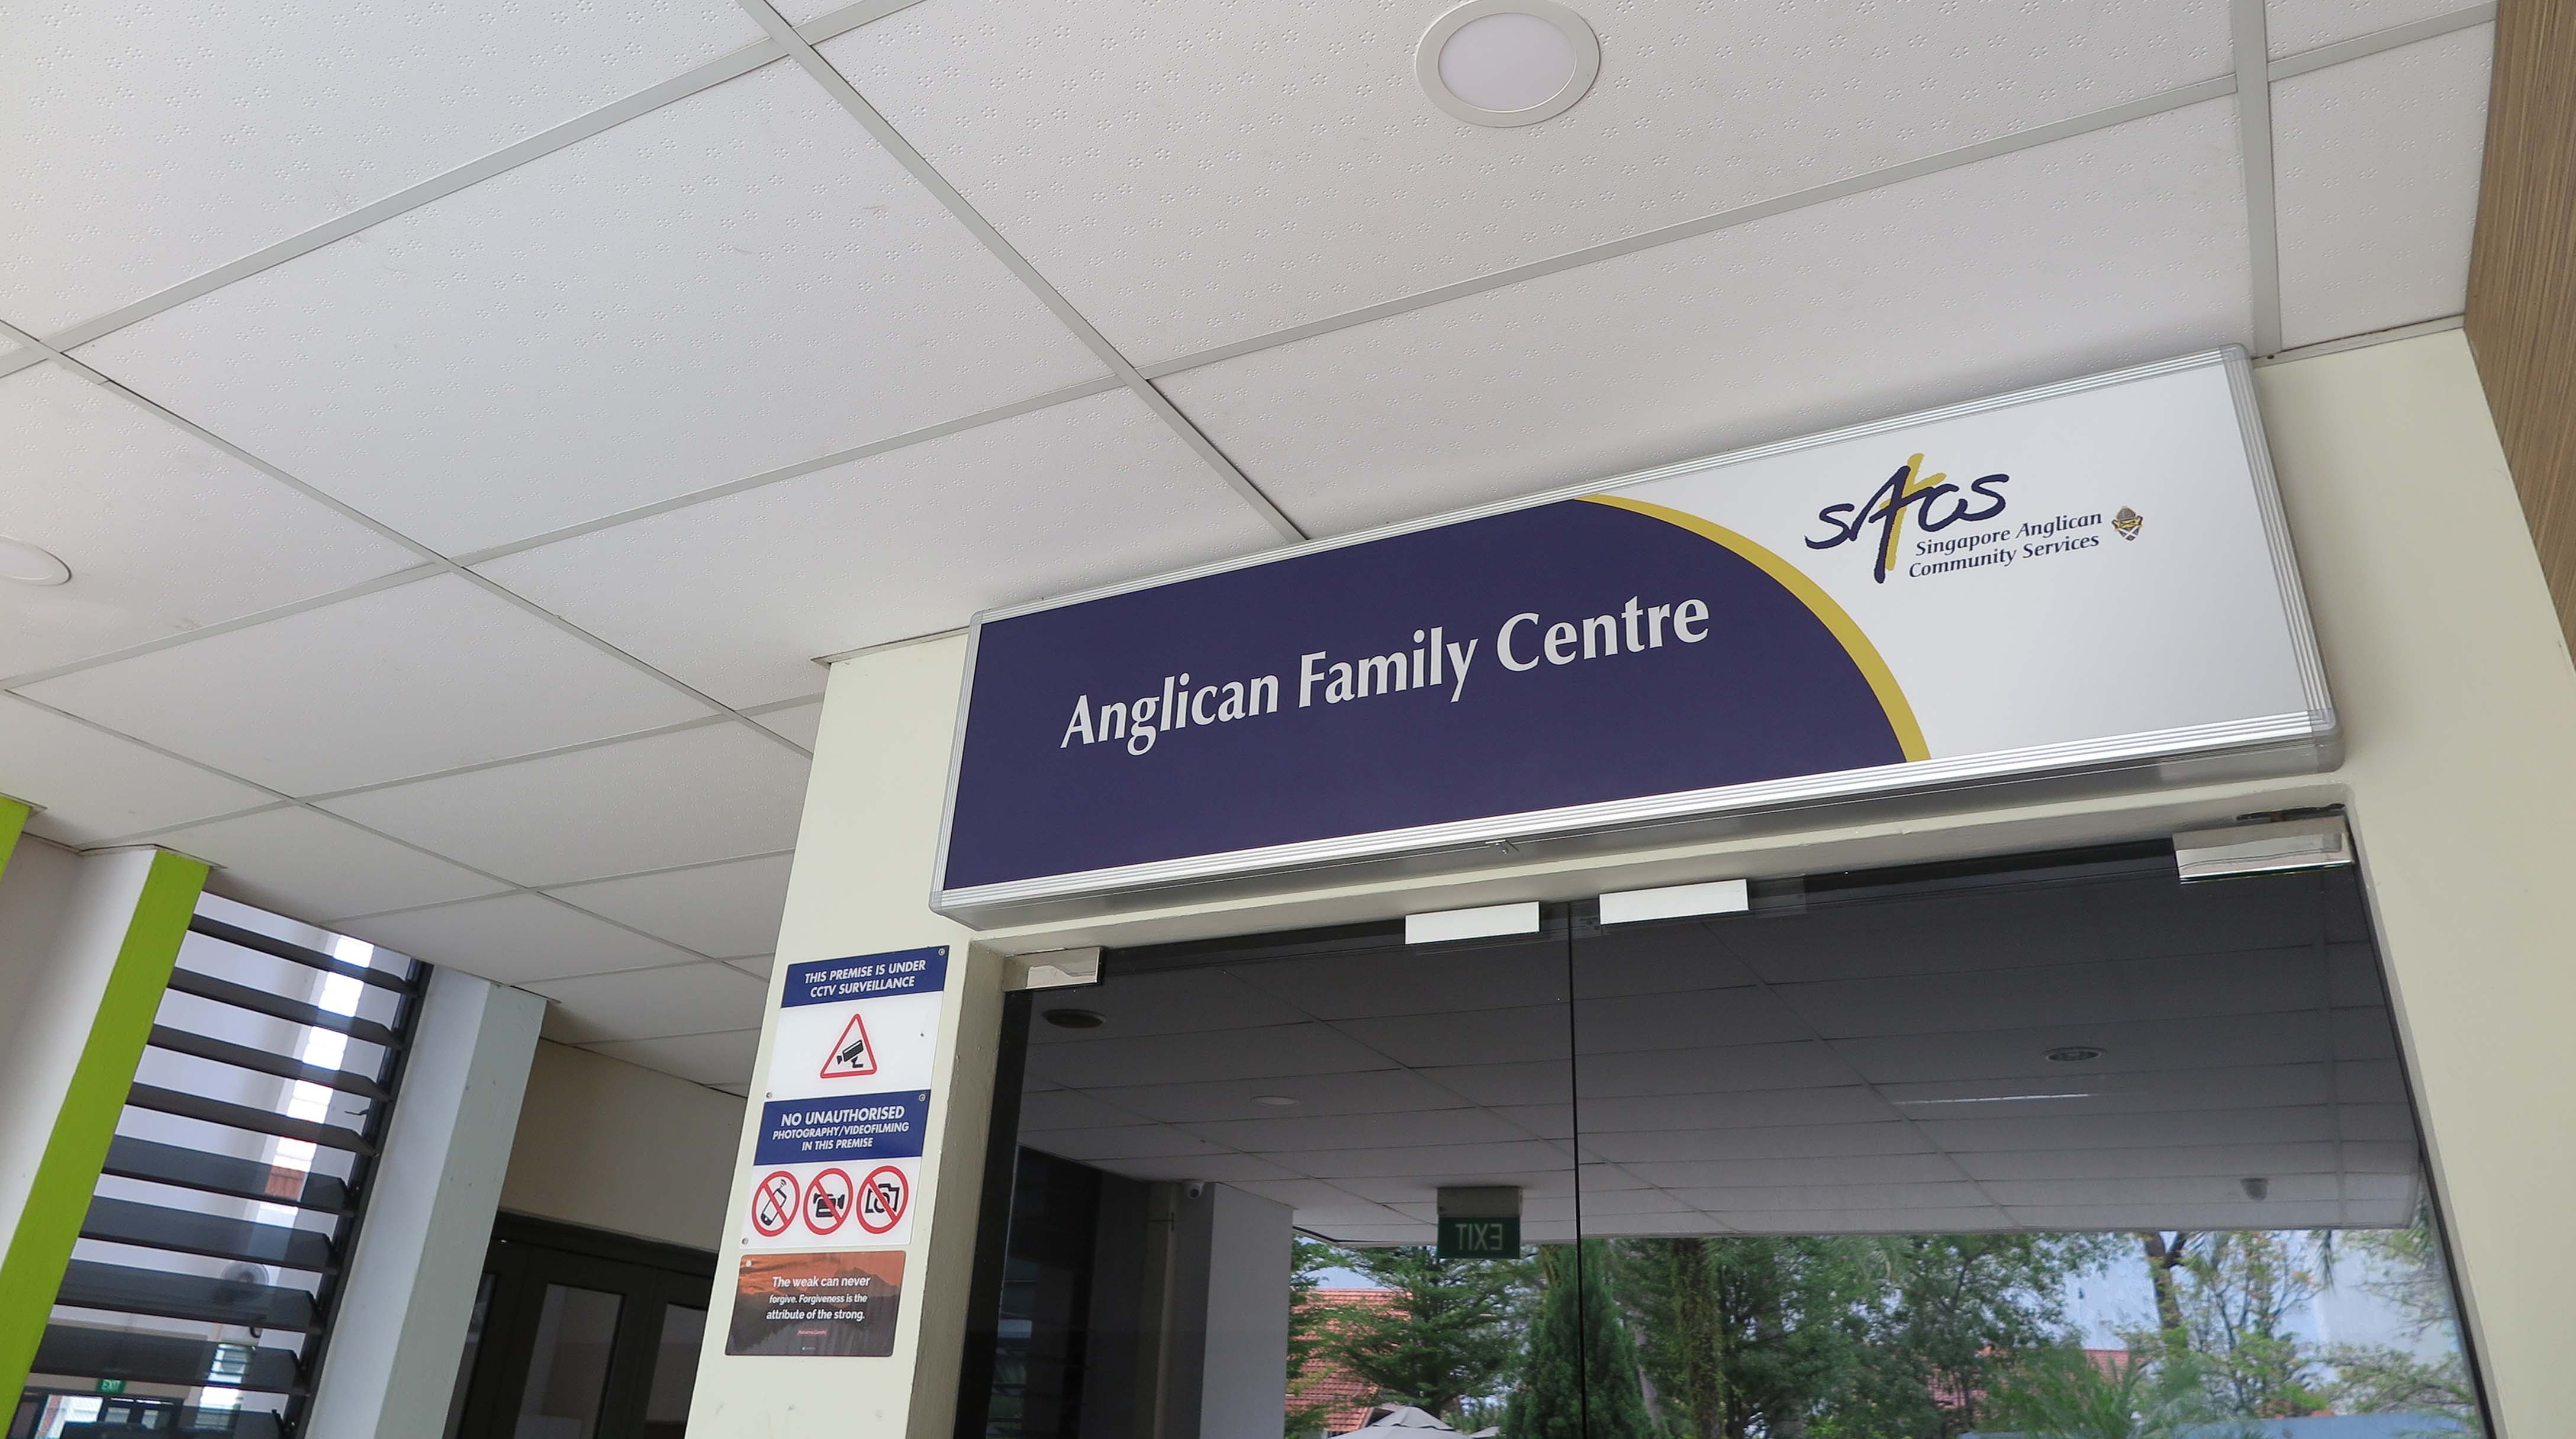 AFC Temporary Refuge for Women and Their Children